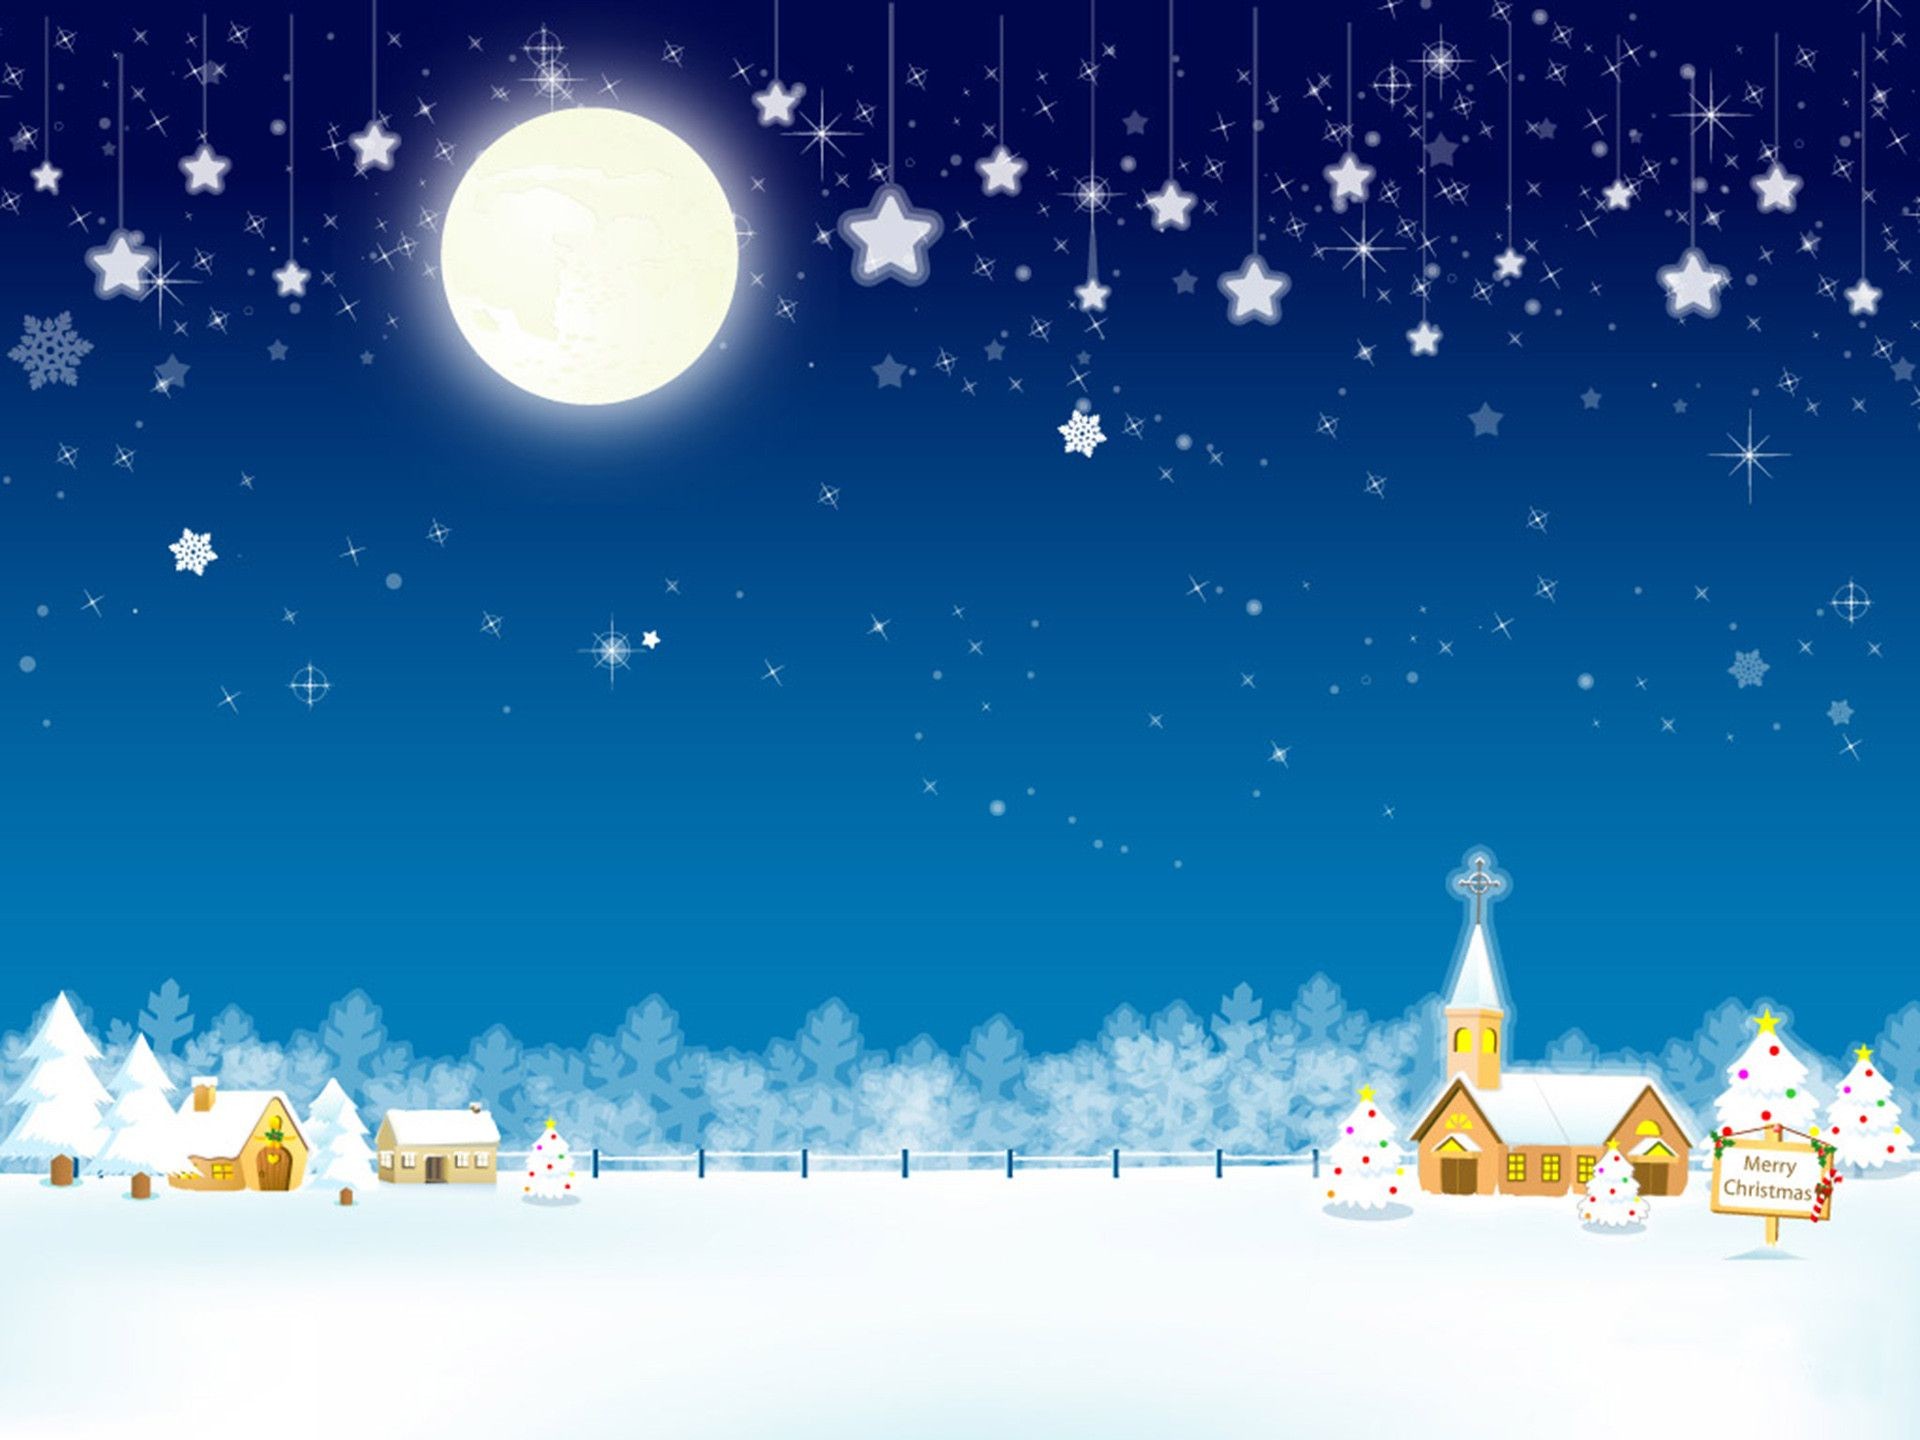 1920x1440 New Merry Christmas Cool Backgrounds | Download Free Word, Excel, PDF